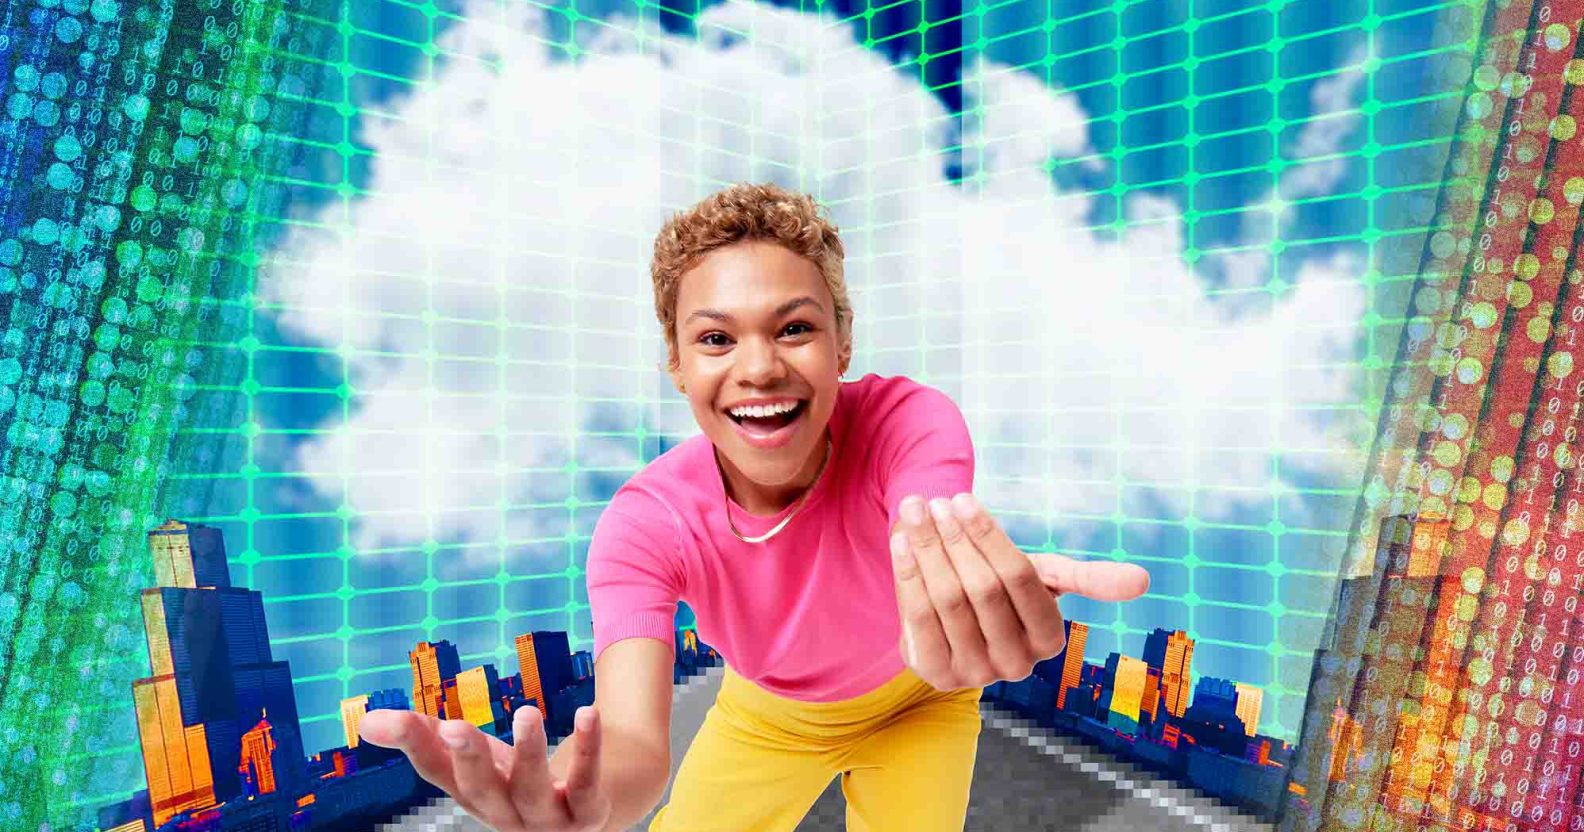 A female presenting person is wearing a pink top and yellow trousers and they are in front of a futuristic background.